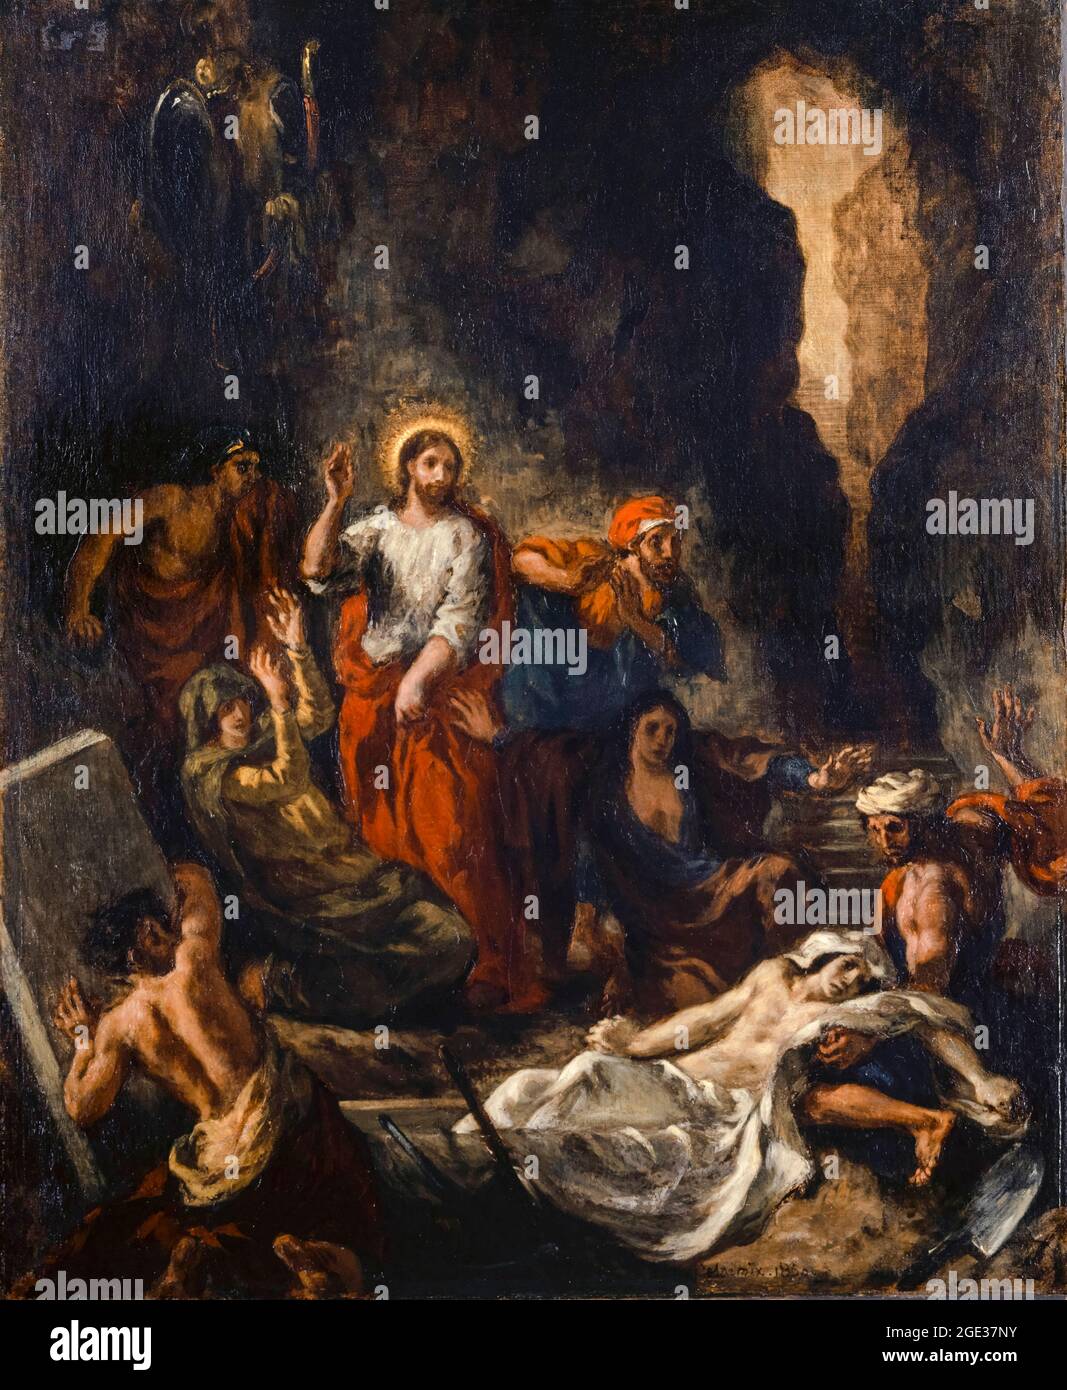 The Resurrection of Lazarus, painting by Eugene Delacroix, 1850 Stock Photo